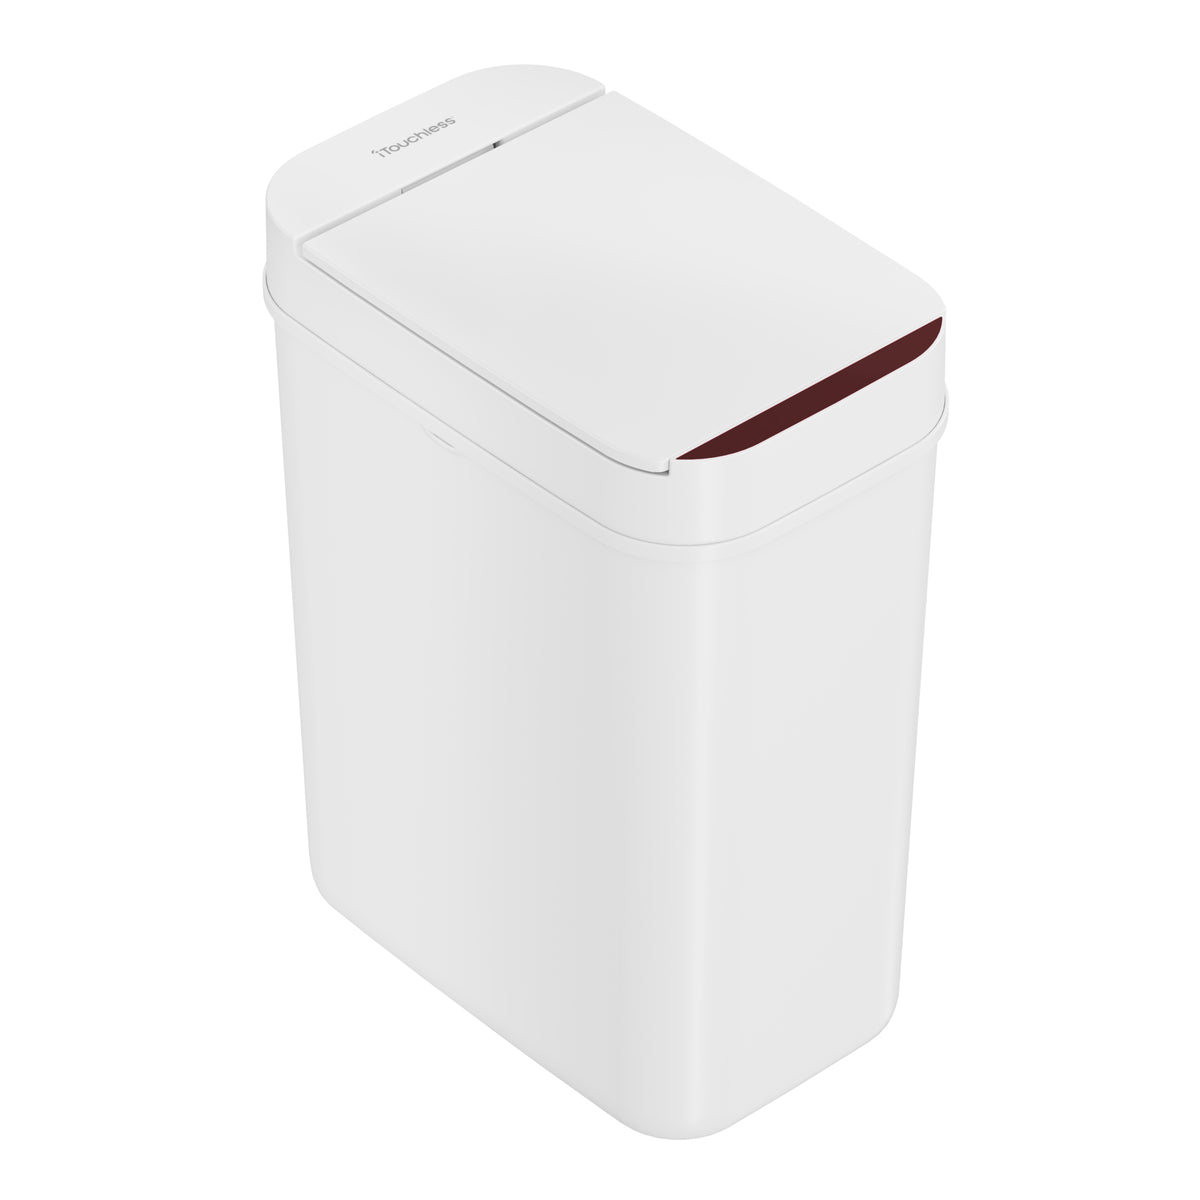 Goplus Automatic Motion Sensor Trash Can, 8 Gallon /30 L Touchless Trash  Bin with Soft Close Lid, Round Stainless Steel Waste Bin, Smart Electric